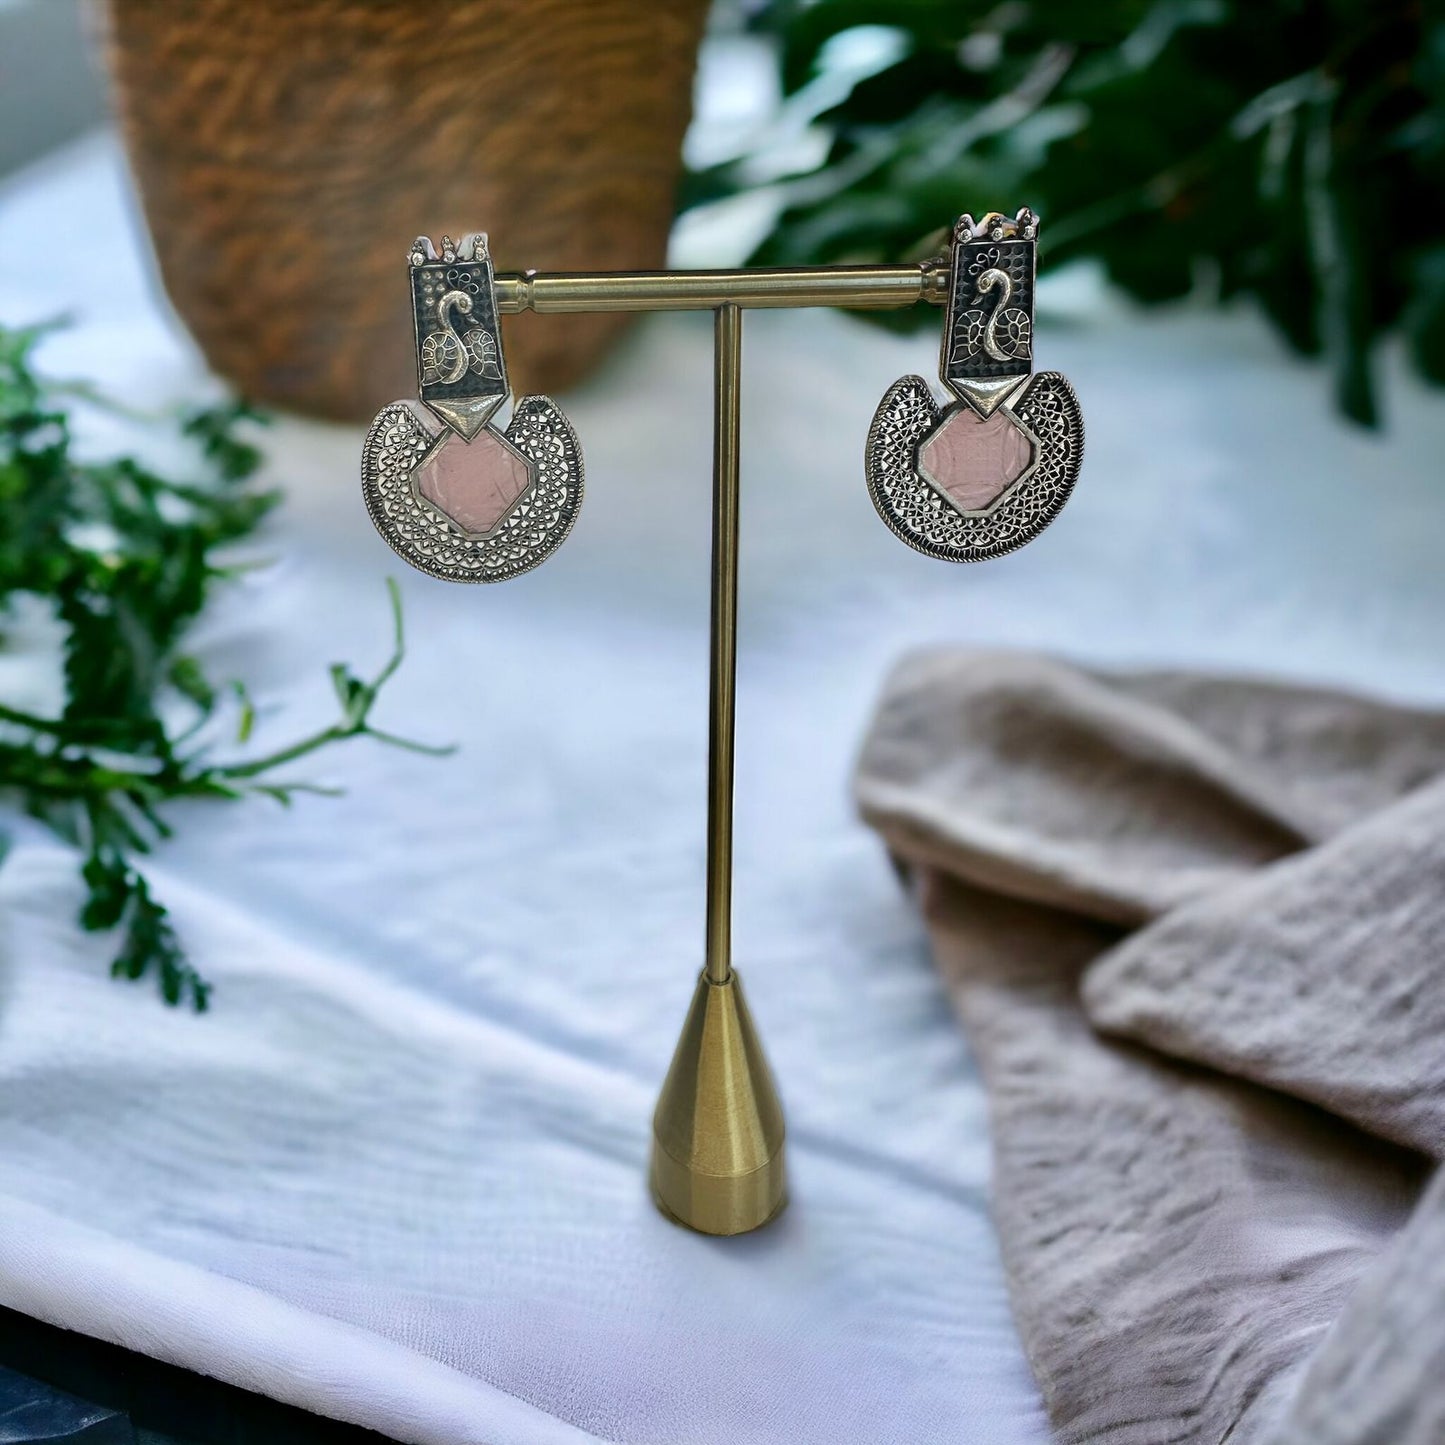 Majestic Plumage: Peacock-Inspired Oxidized Silver Earrings with Onion Pink Crafted Stone